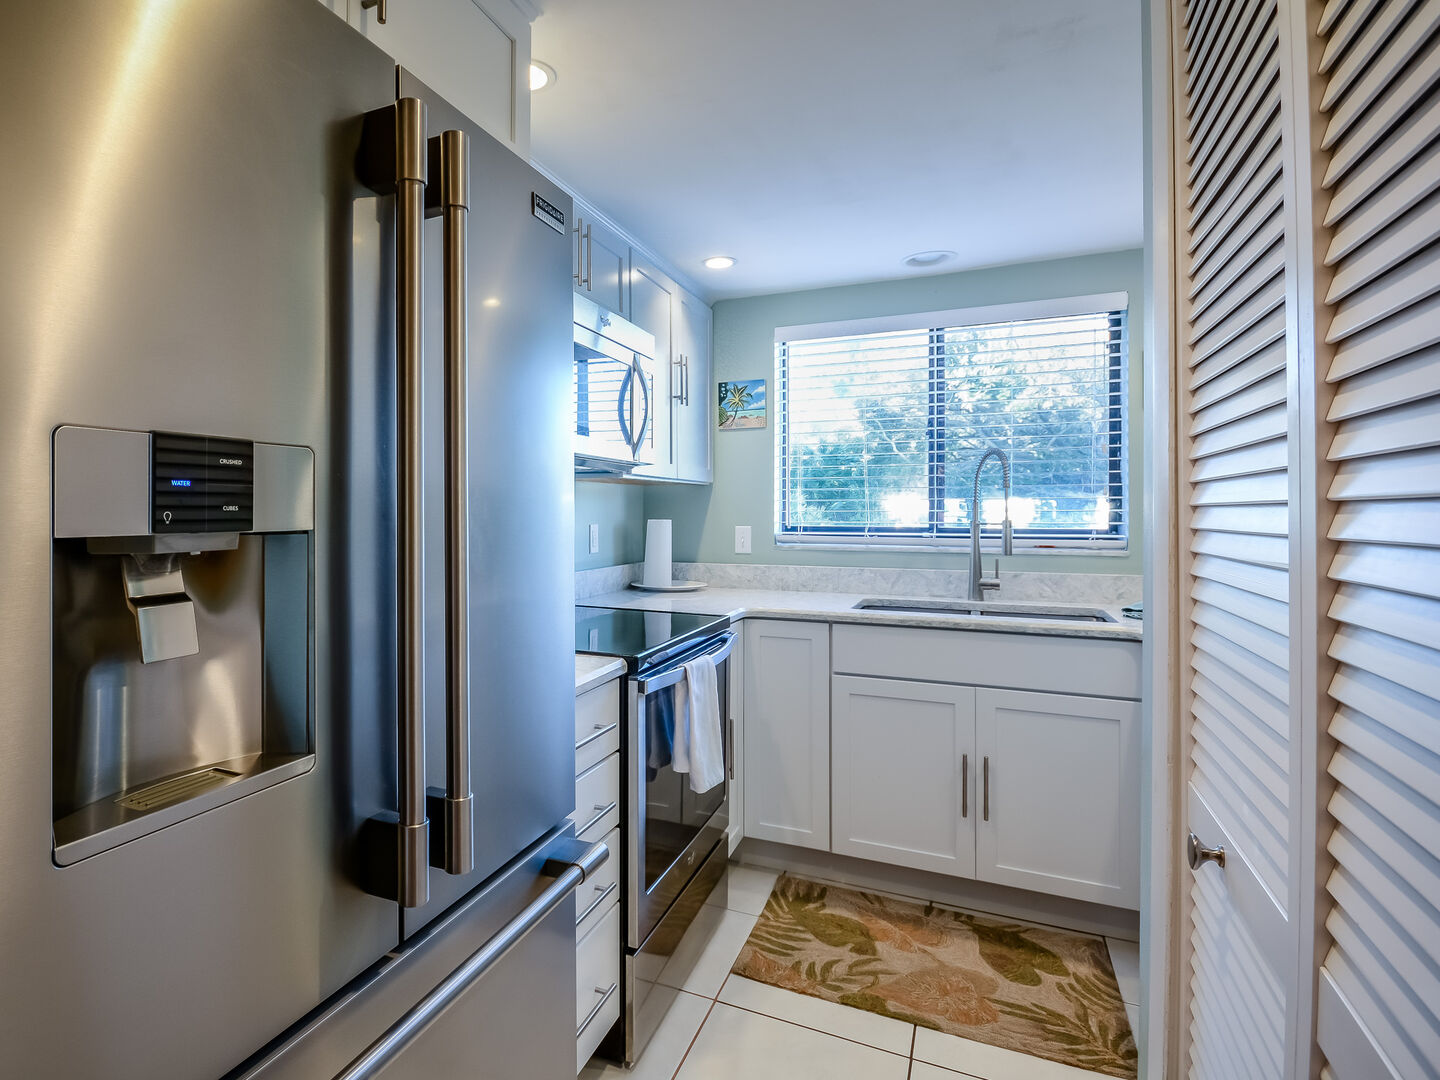 The fully equipped kitchen with double door fridge, oven range, microwave, and sink.